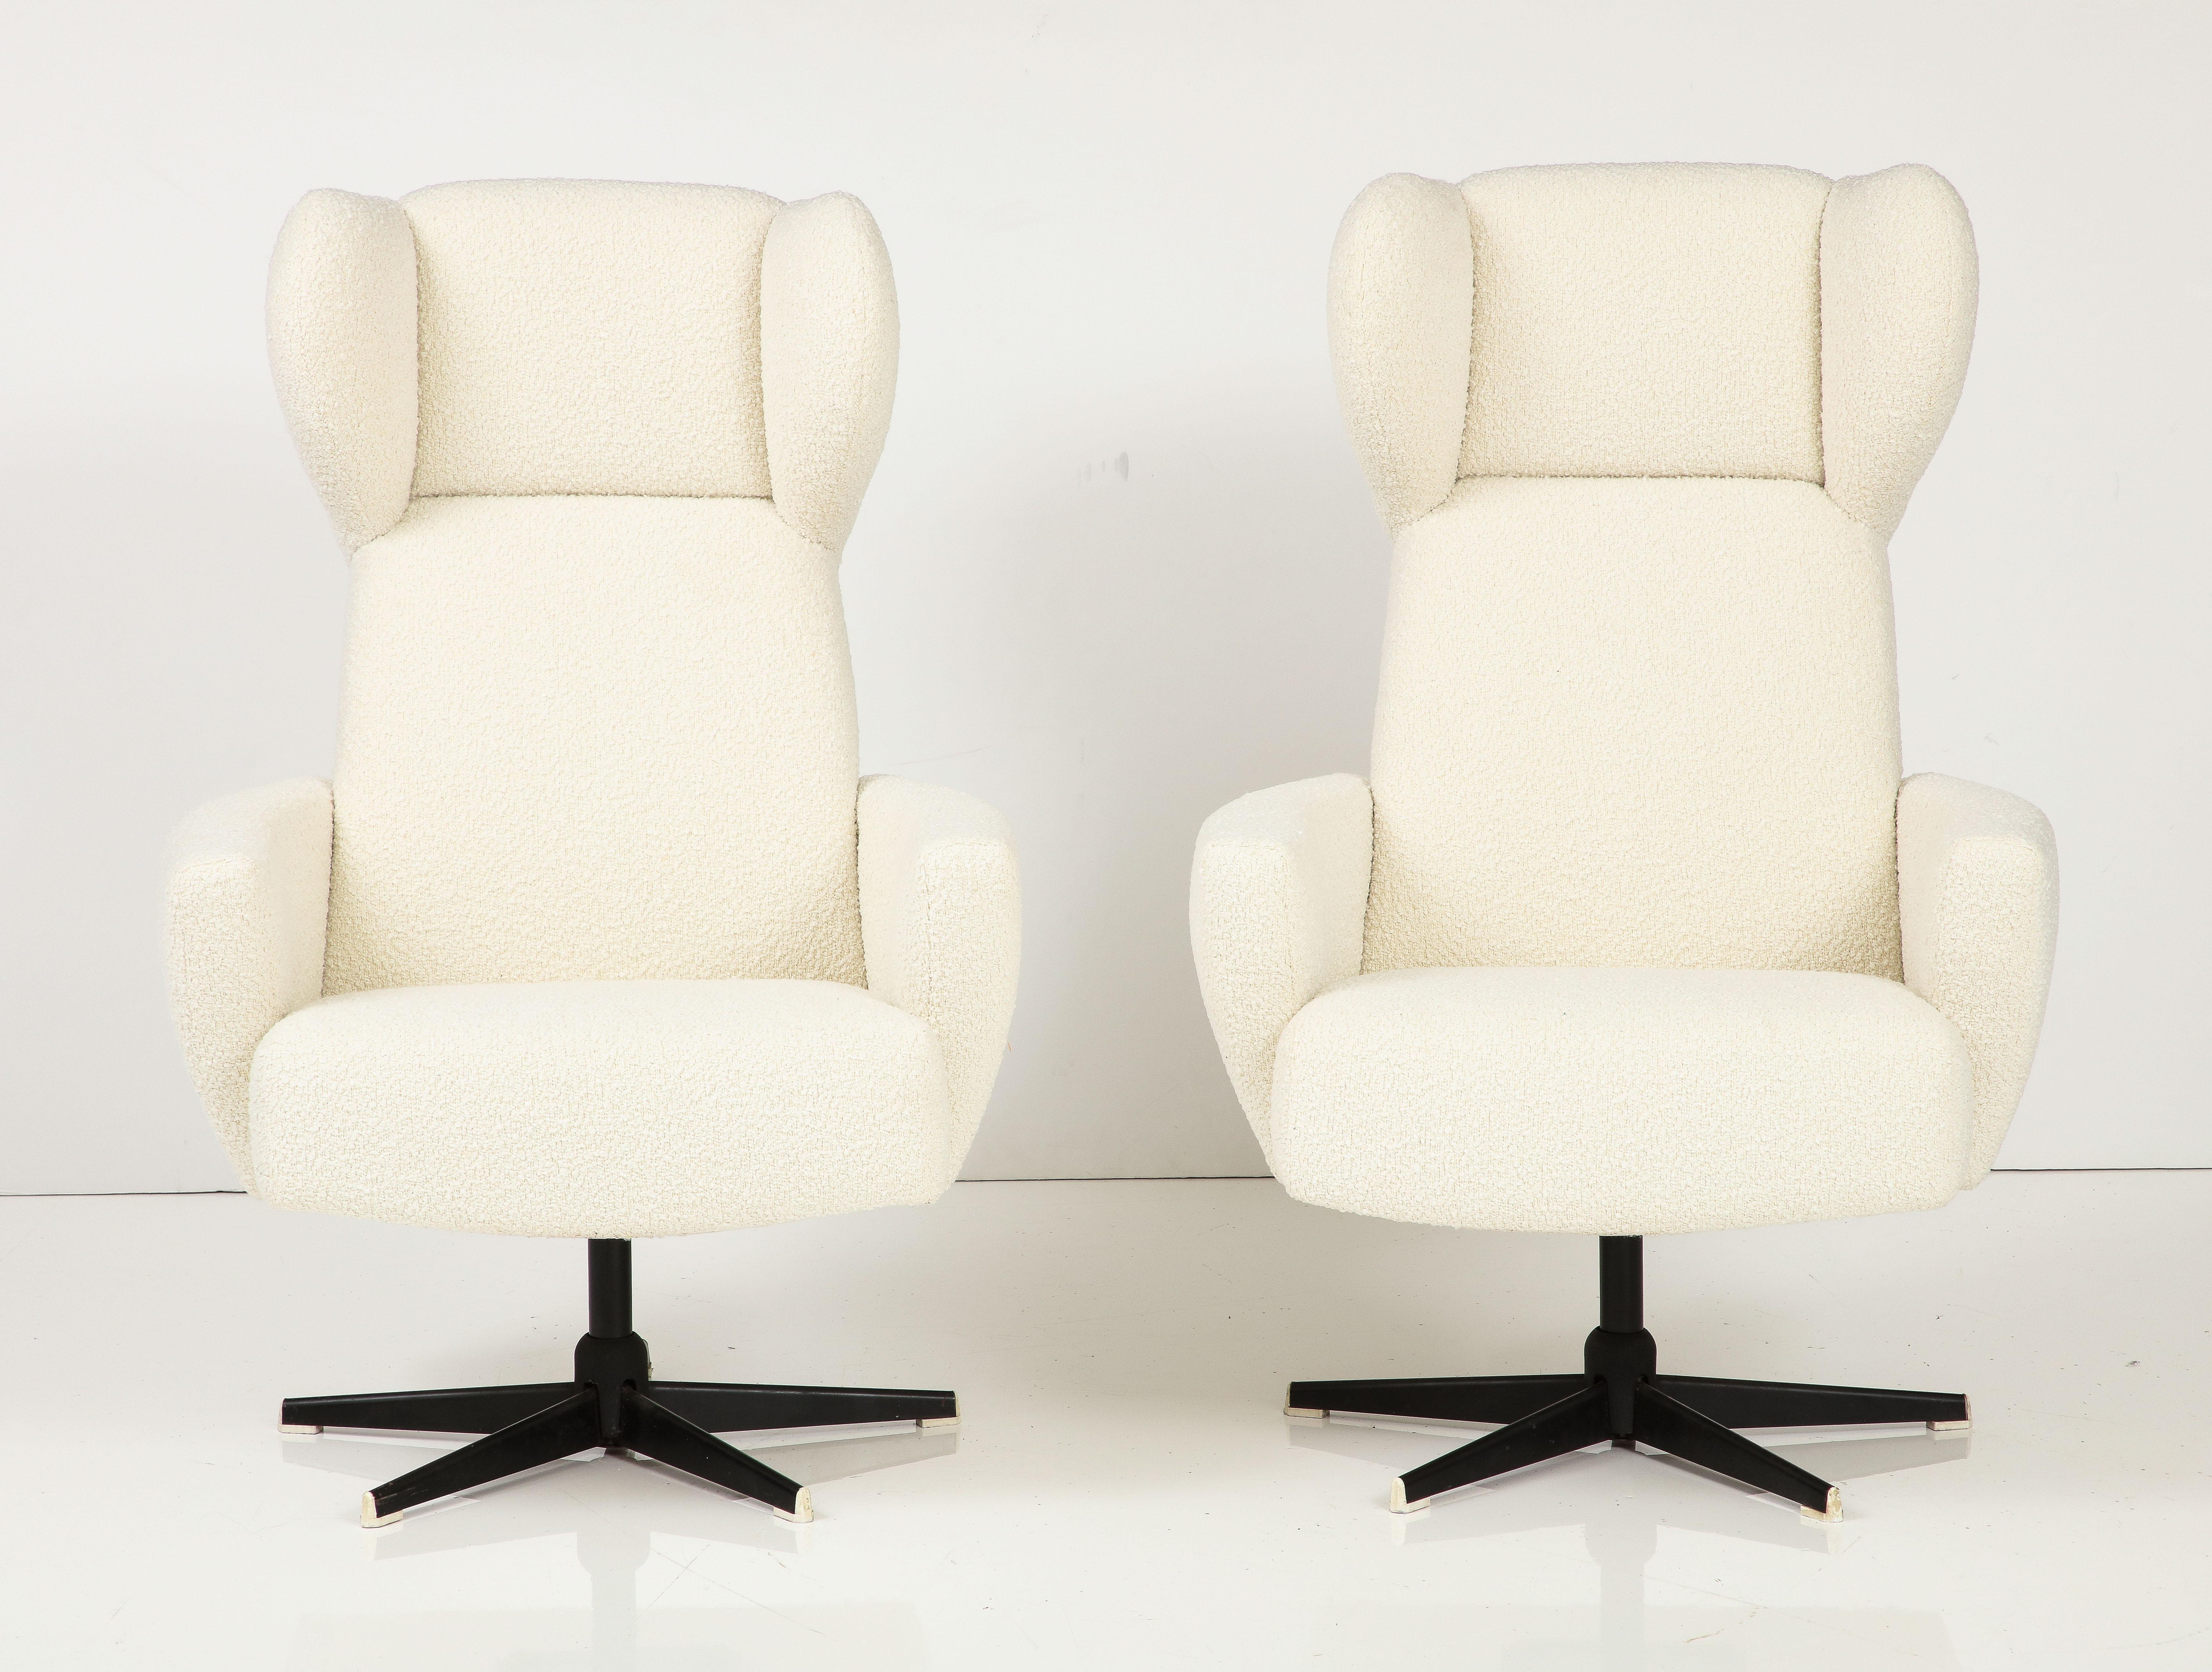 Pair of Italian Modernist High-Back Swivel Chairs, Italy, circa 1960 In Good Condition For Sale In New York, NY